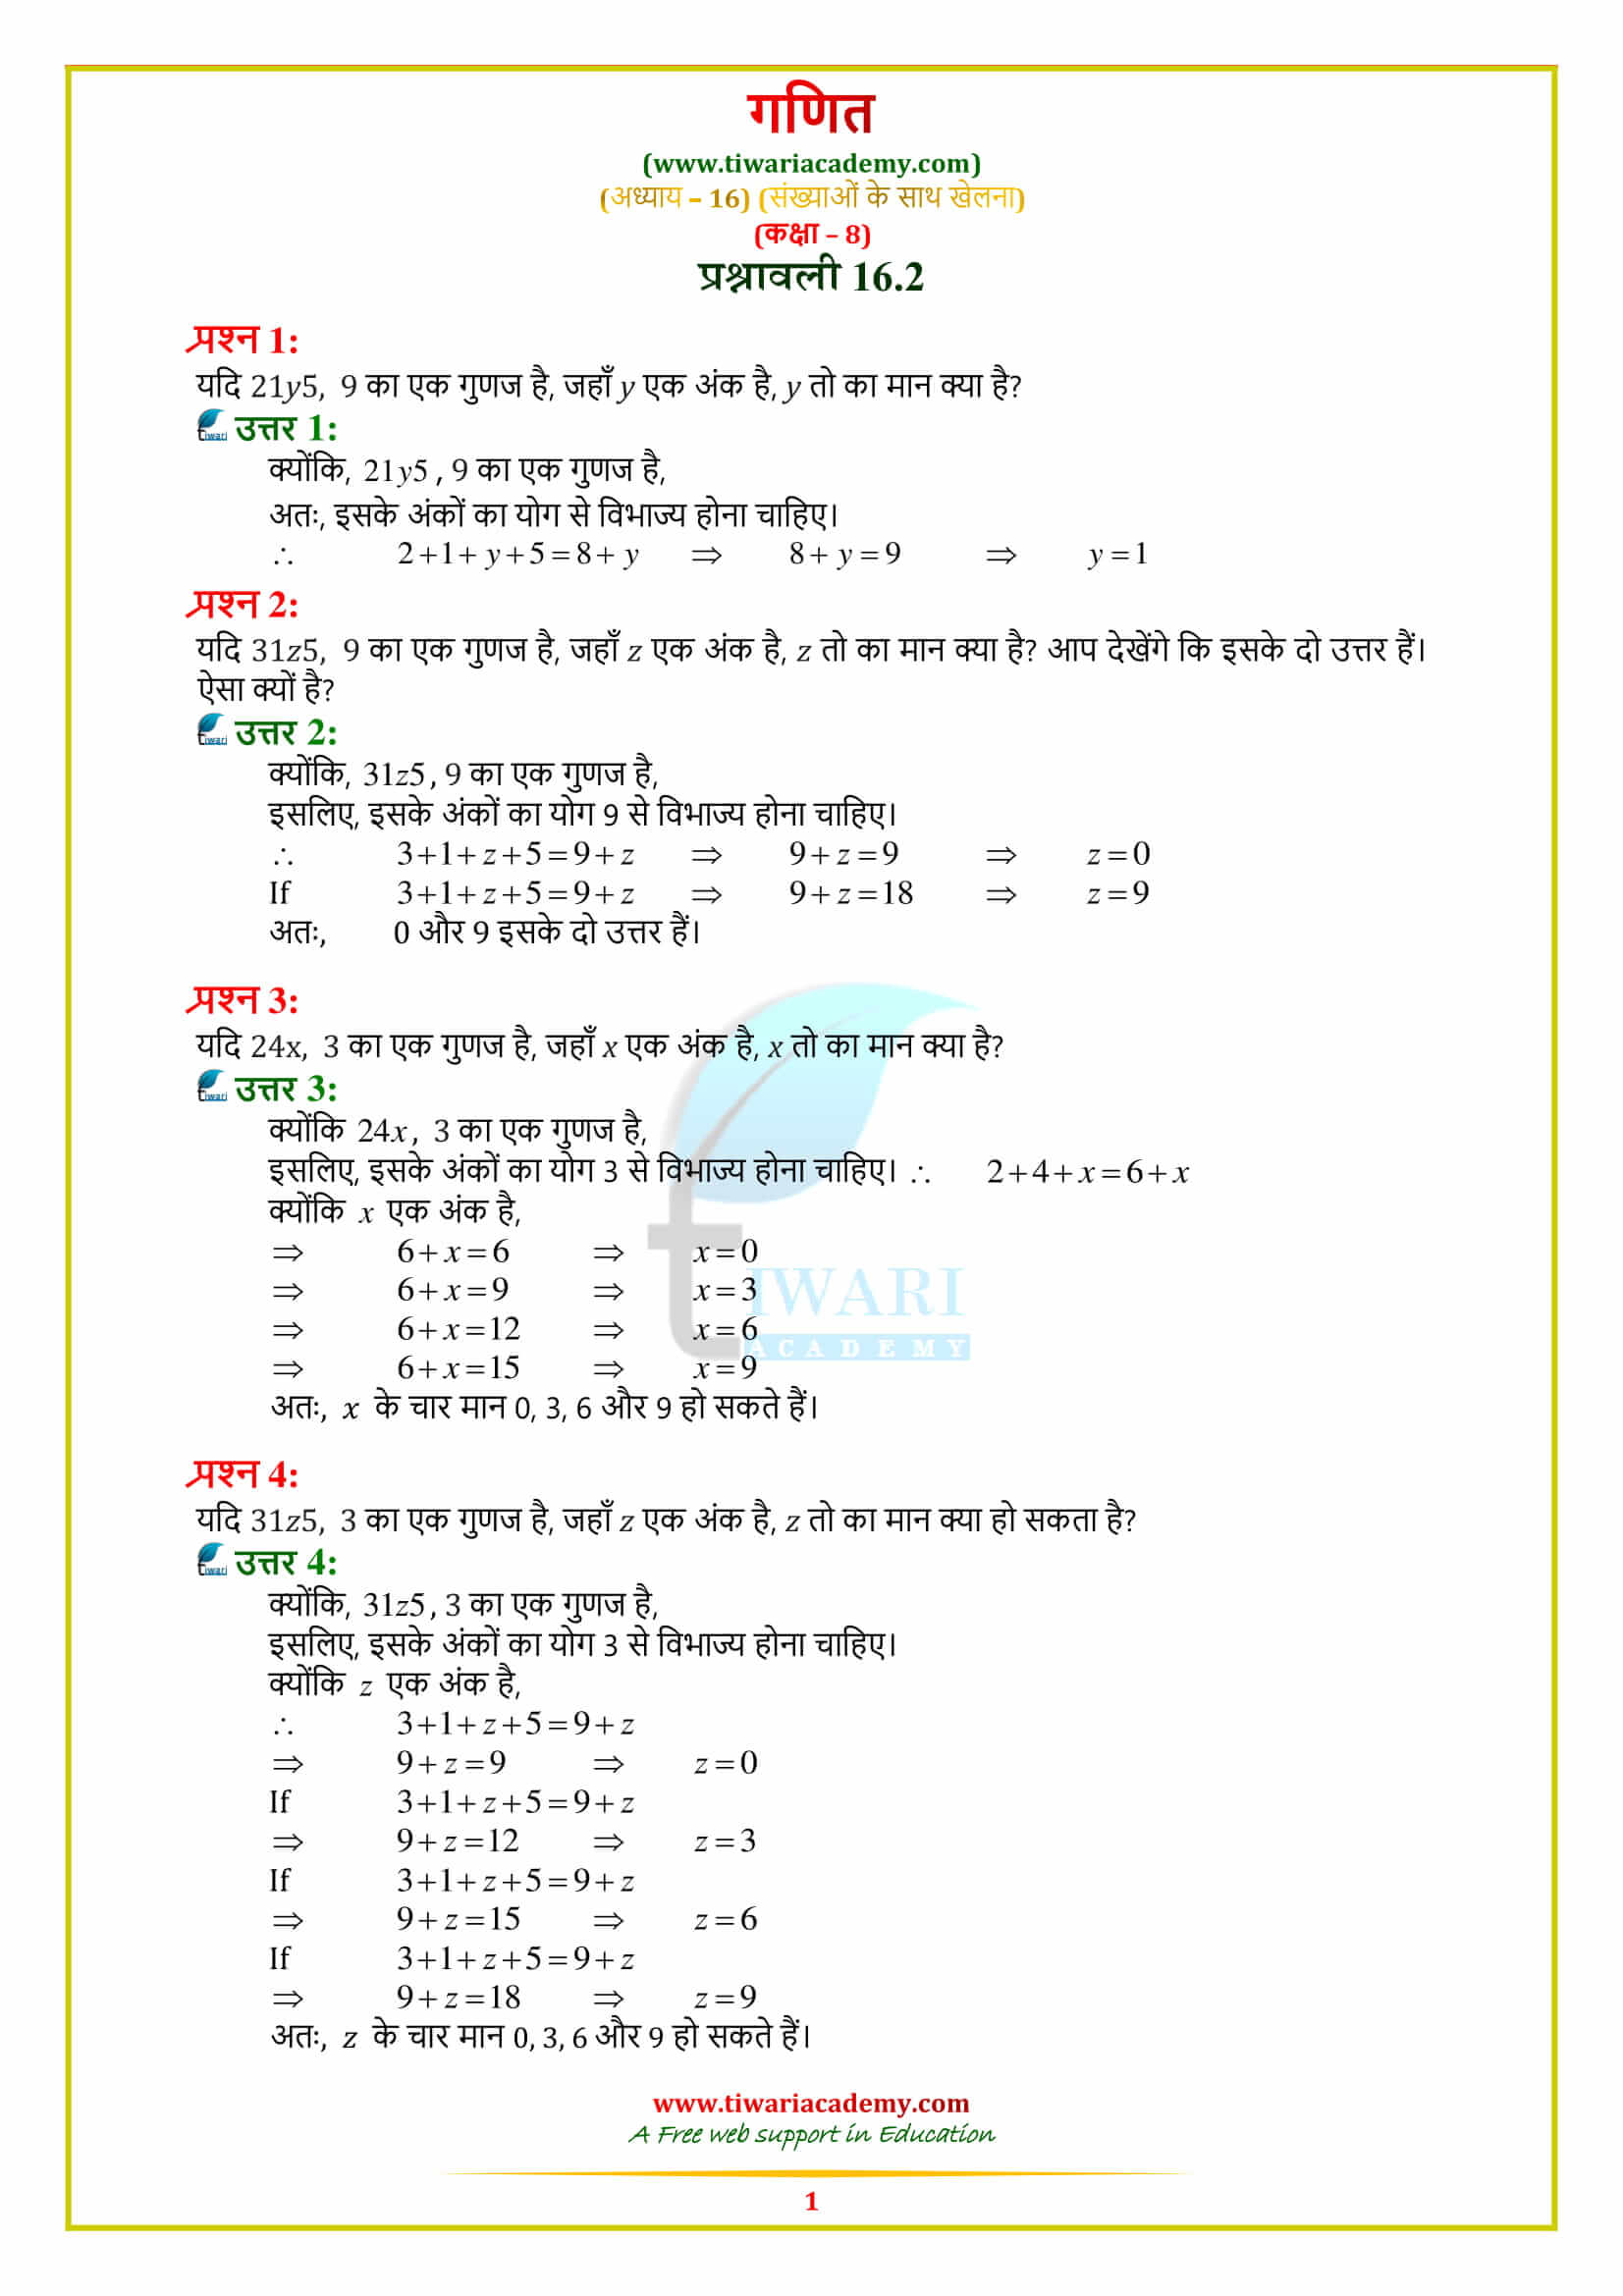 NCERT Solutions for Class 8 Maths Chapter 16 Exercise 16.2